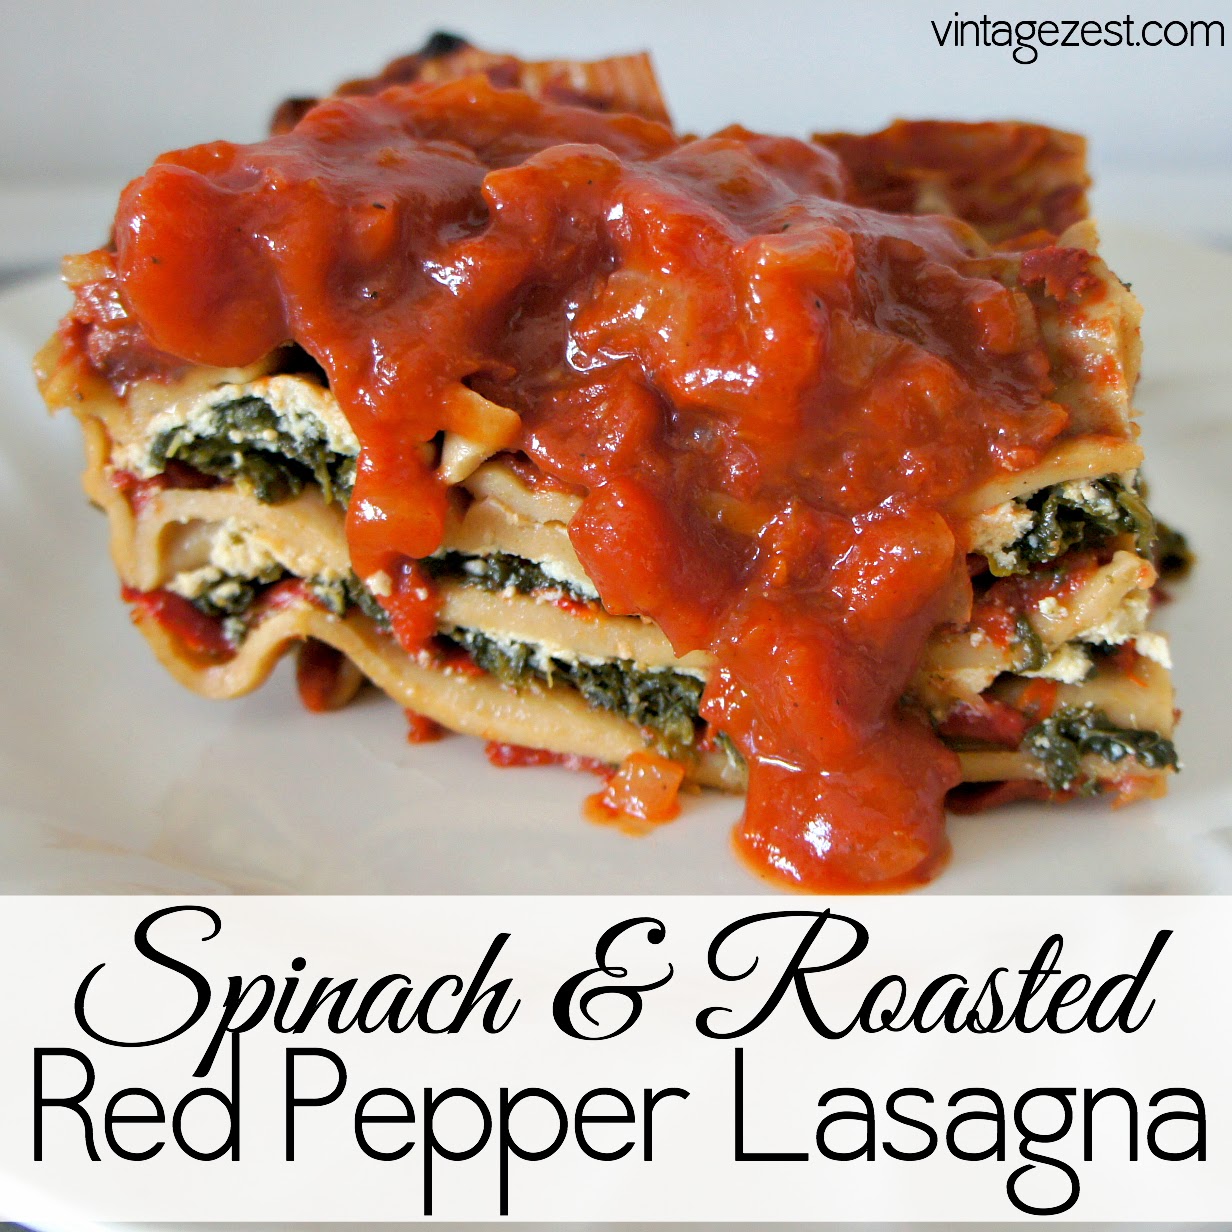 Slow Cooker Roasted Red Pepper Lasagna is a tasty, easy and pillowy